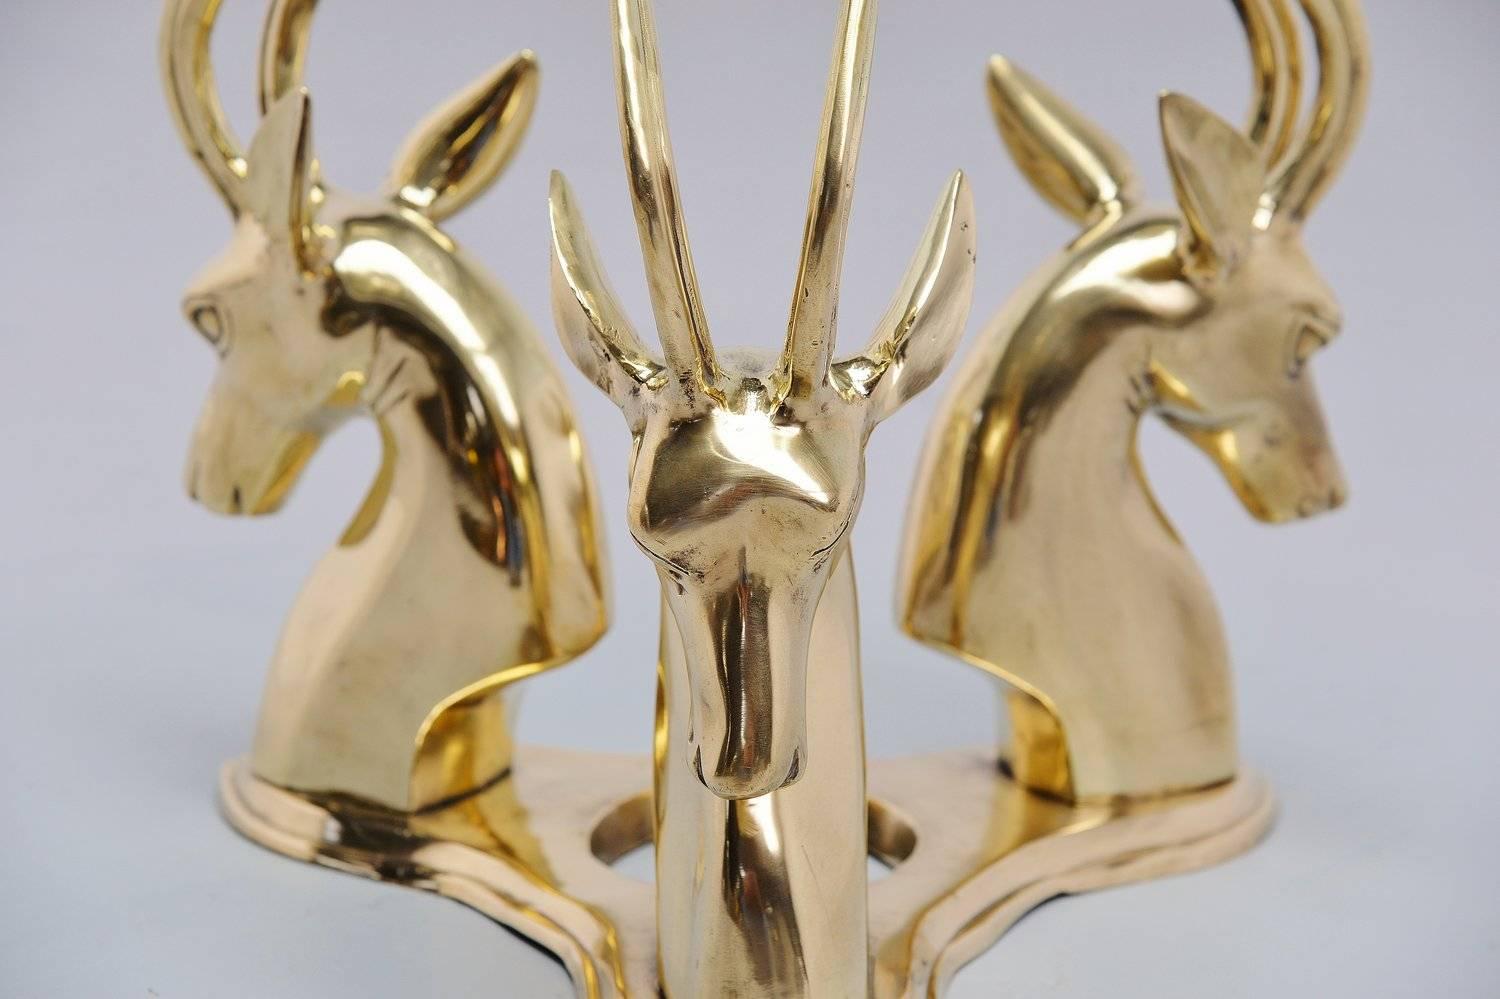 This table is made of solid bronze and has 3 antelopes supporting a round glass top. It could be a design by Jacques Duval-Brasseur who worked a lot with animals in his furniture. The table is in very shiny and clean condition and would be a real